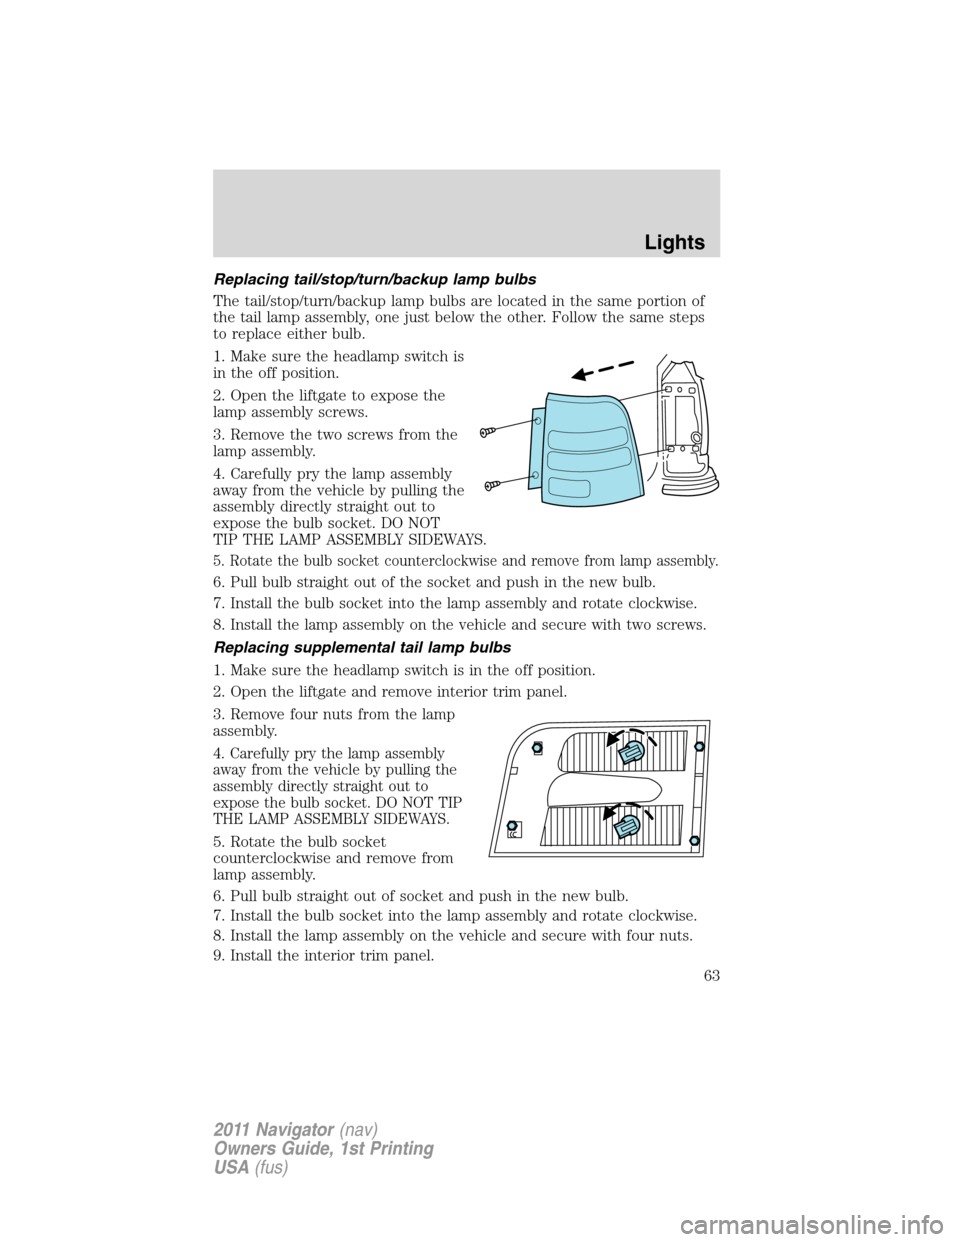 LINCOLN NAVIGATOR 2011  Owners Manual Replacing tail/stop/turn/backup lamp bulbs
The tail/stop/turn/backup lamp bulbs are located in the same portion of
the tail lamp assembly, one just below the other. Follow the same steps
to replace ei